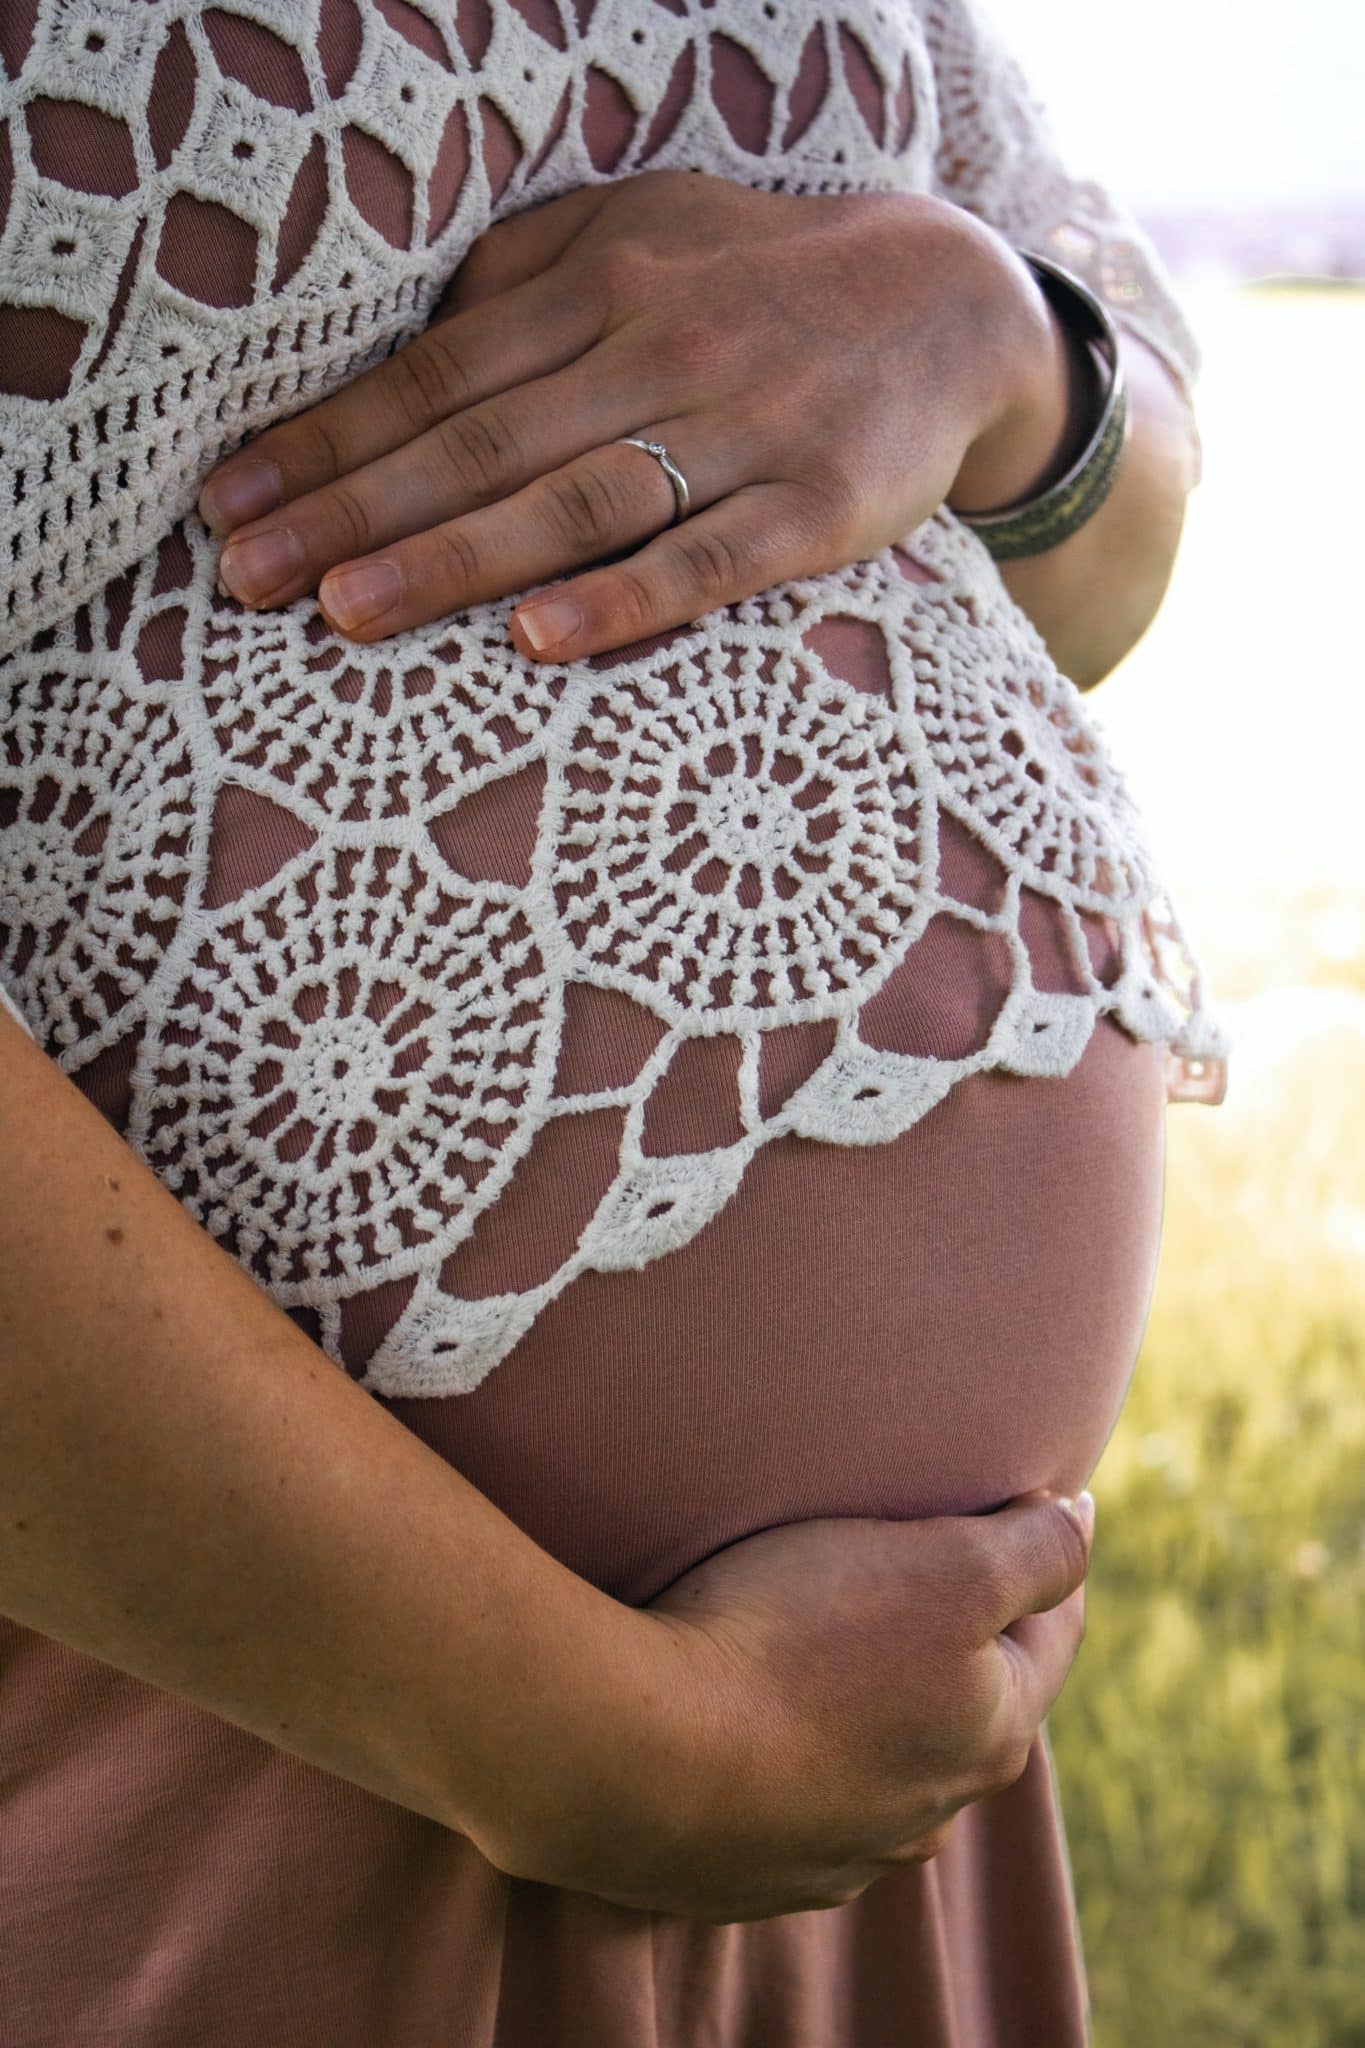 Photo of a pregnant woman wearing a white lace top, holding her belly with both hands.